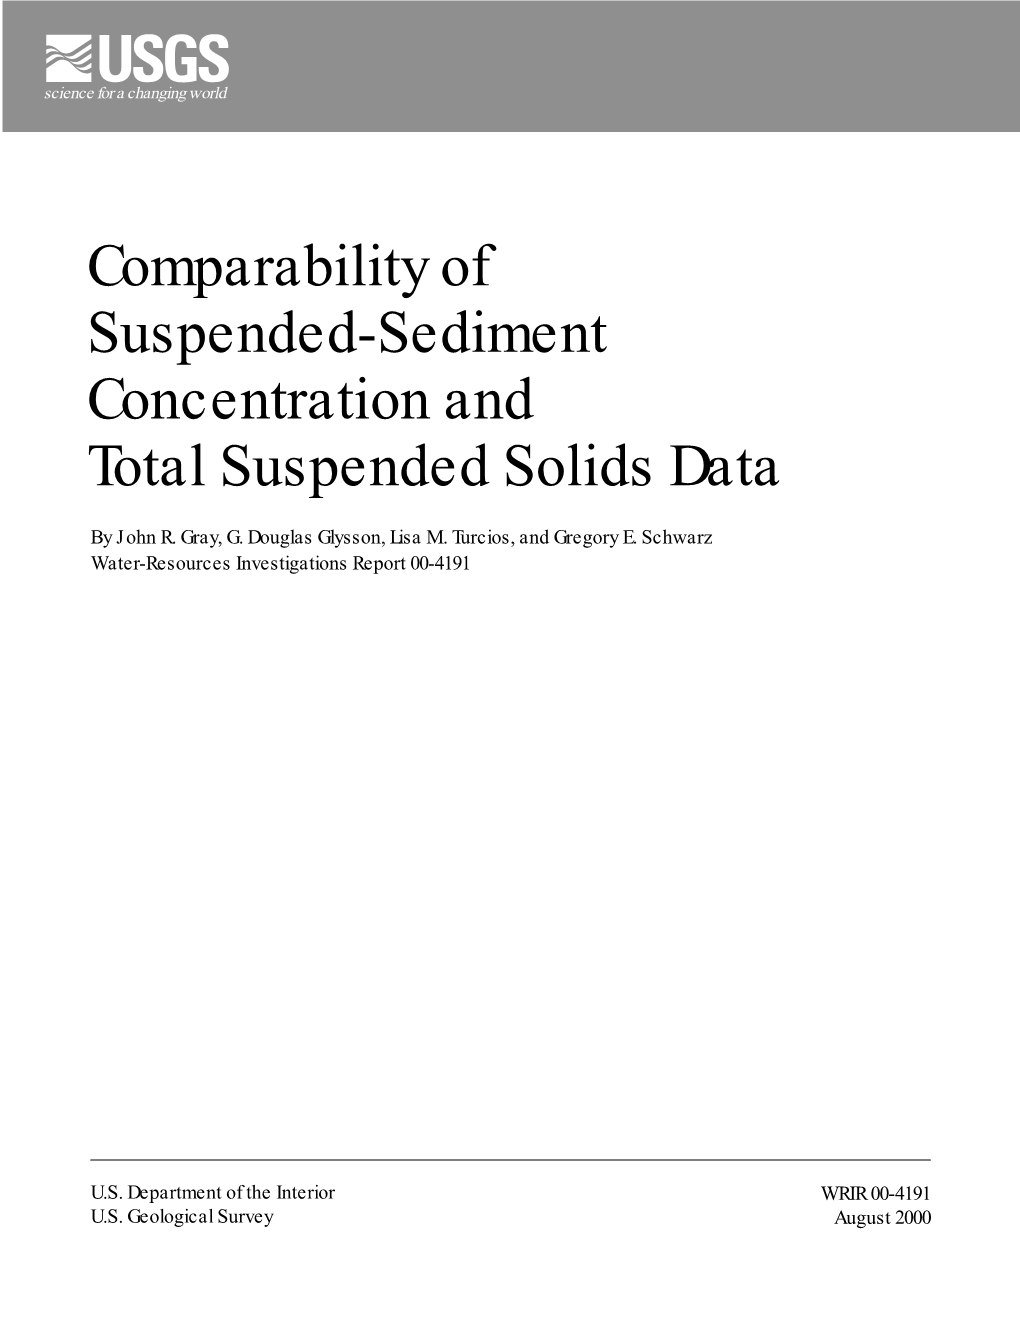 Comparability of Suspended-Sediment Concentration and Total Suspended Solids Data